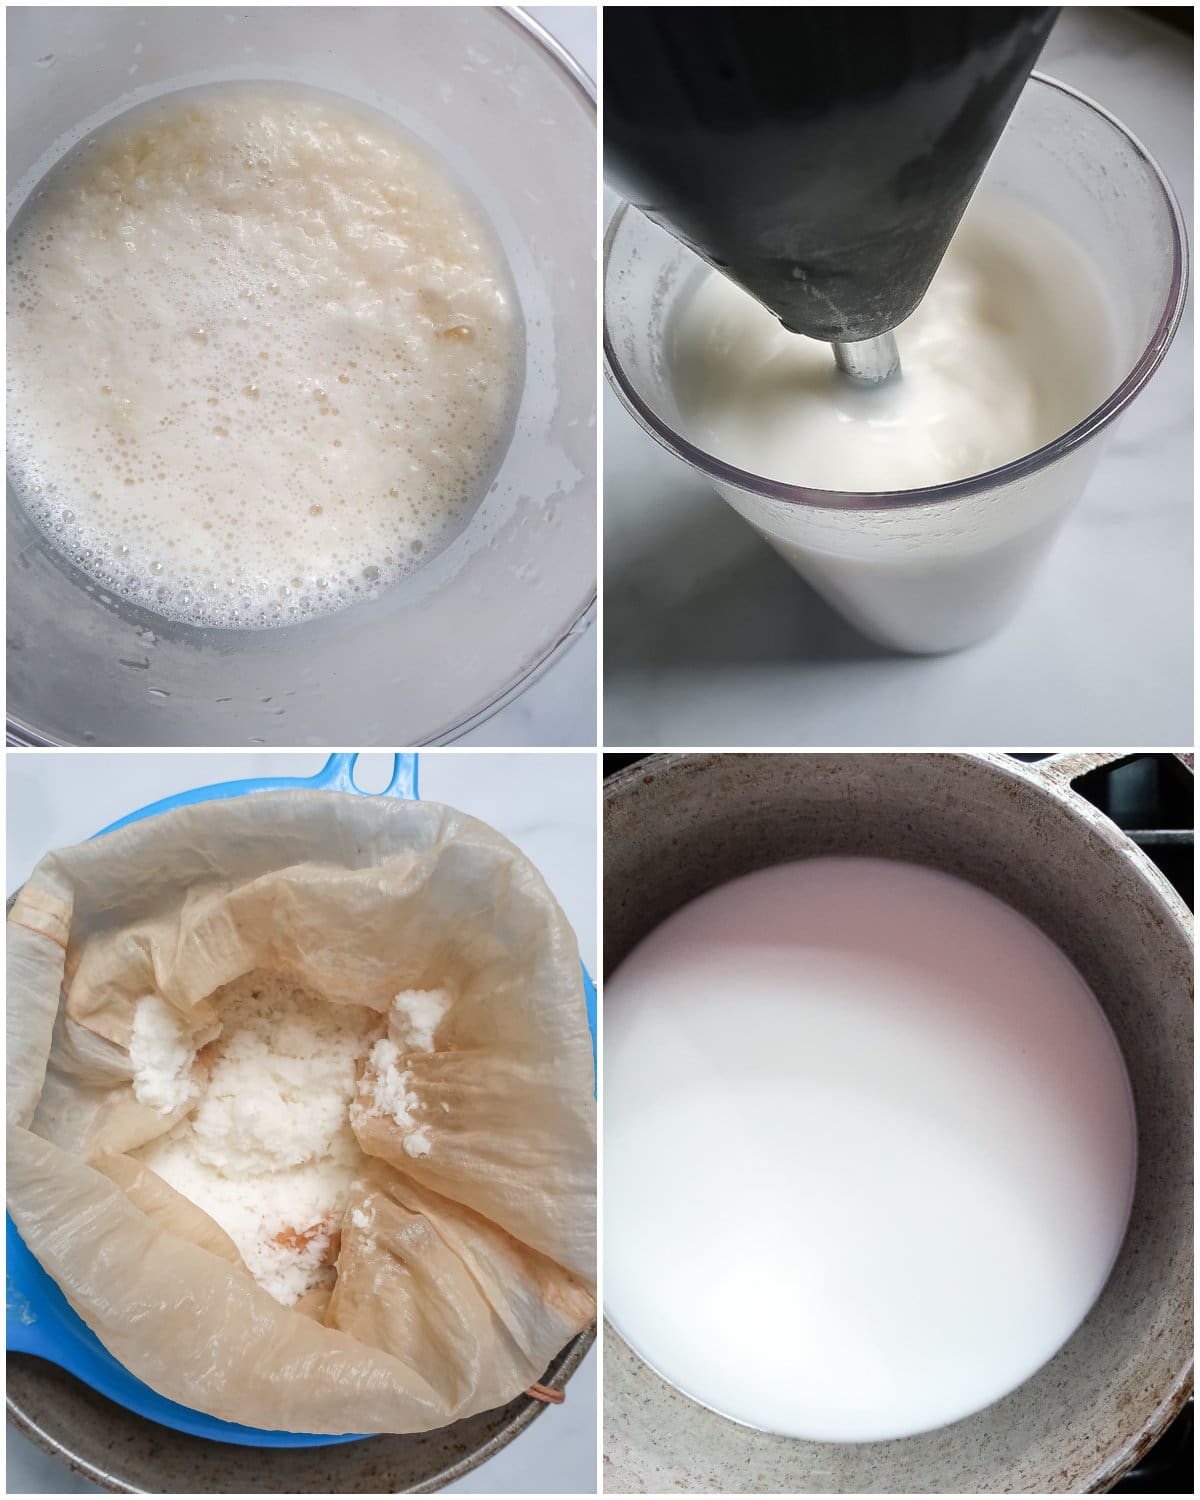 Step by step photos showing how to make fresh coconut milk.